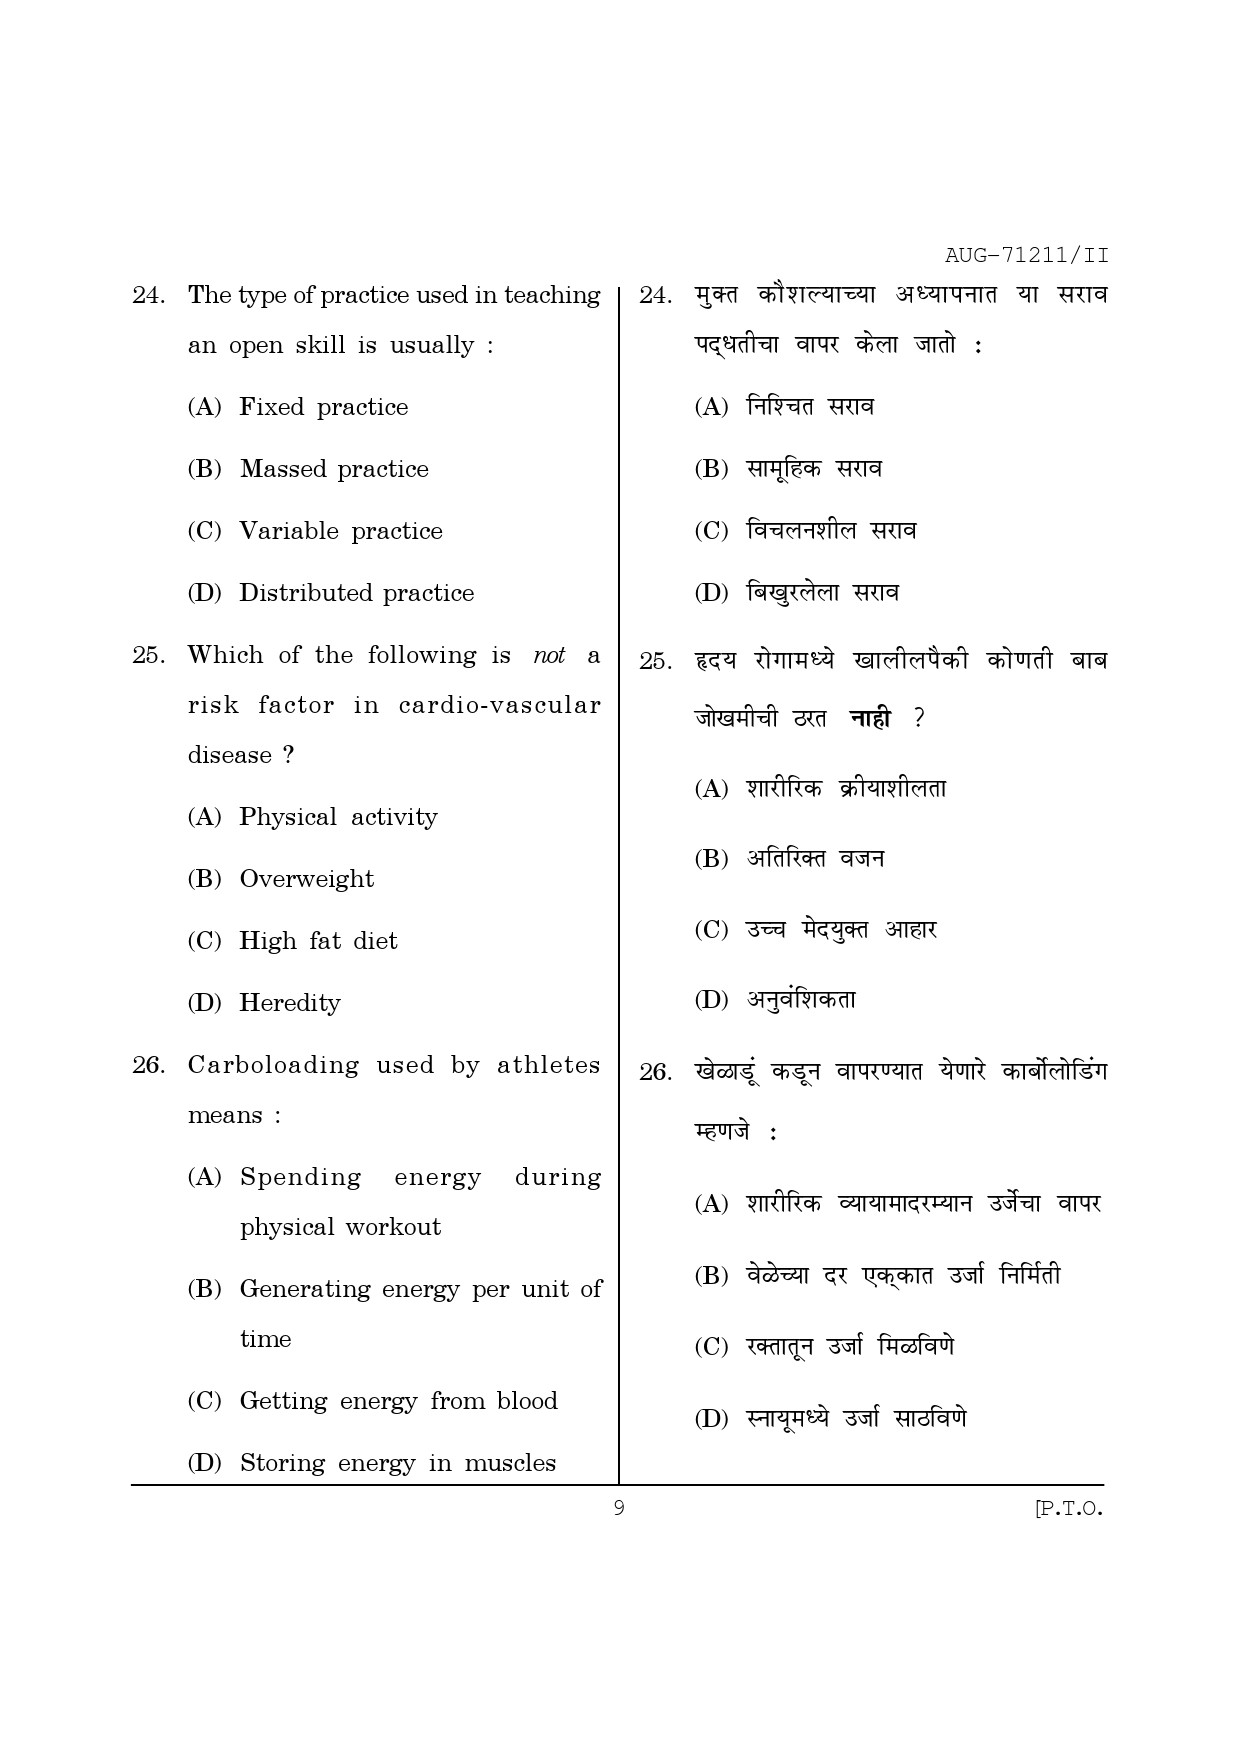 Maharashtra SET Physical Education Question Paper II August 2011 9